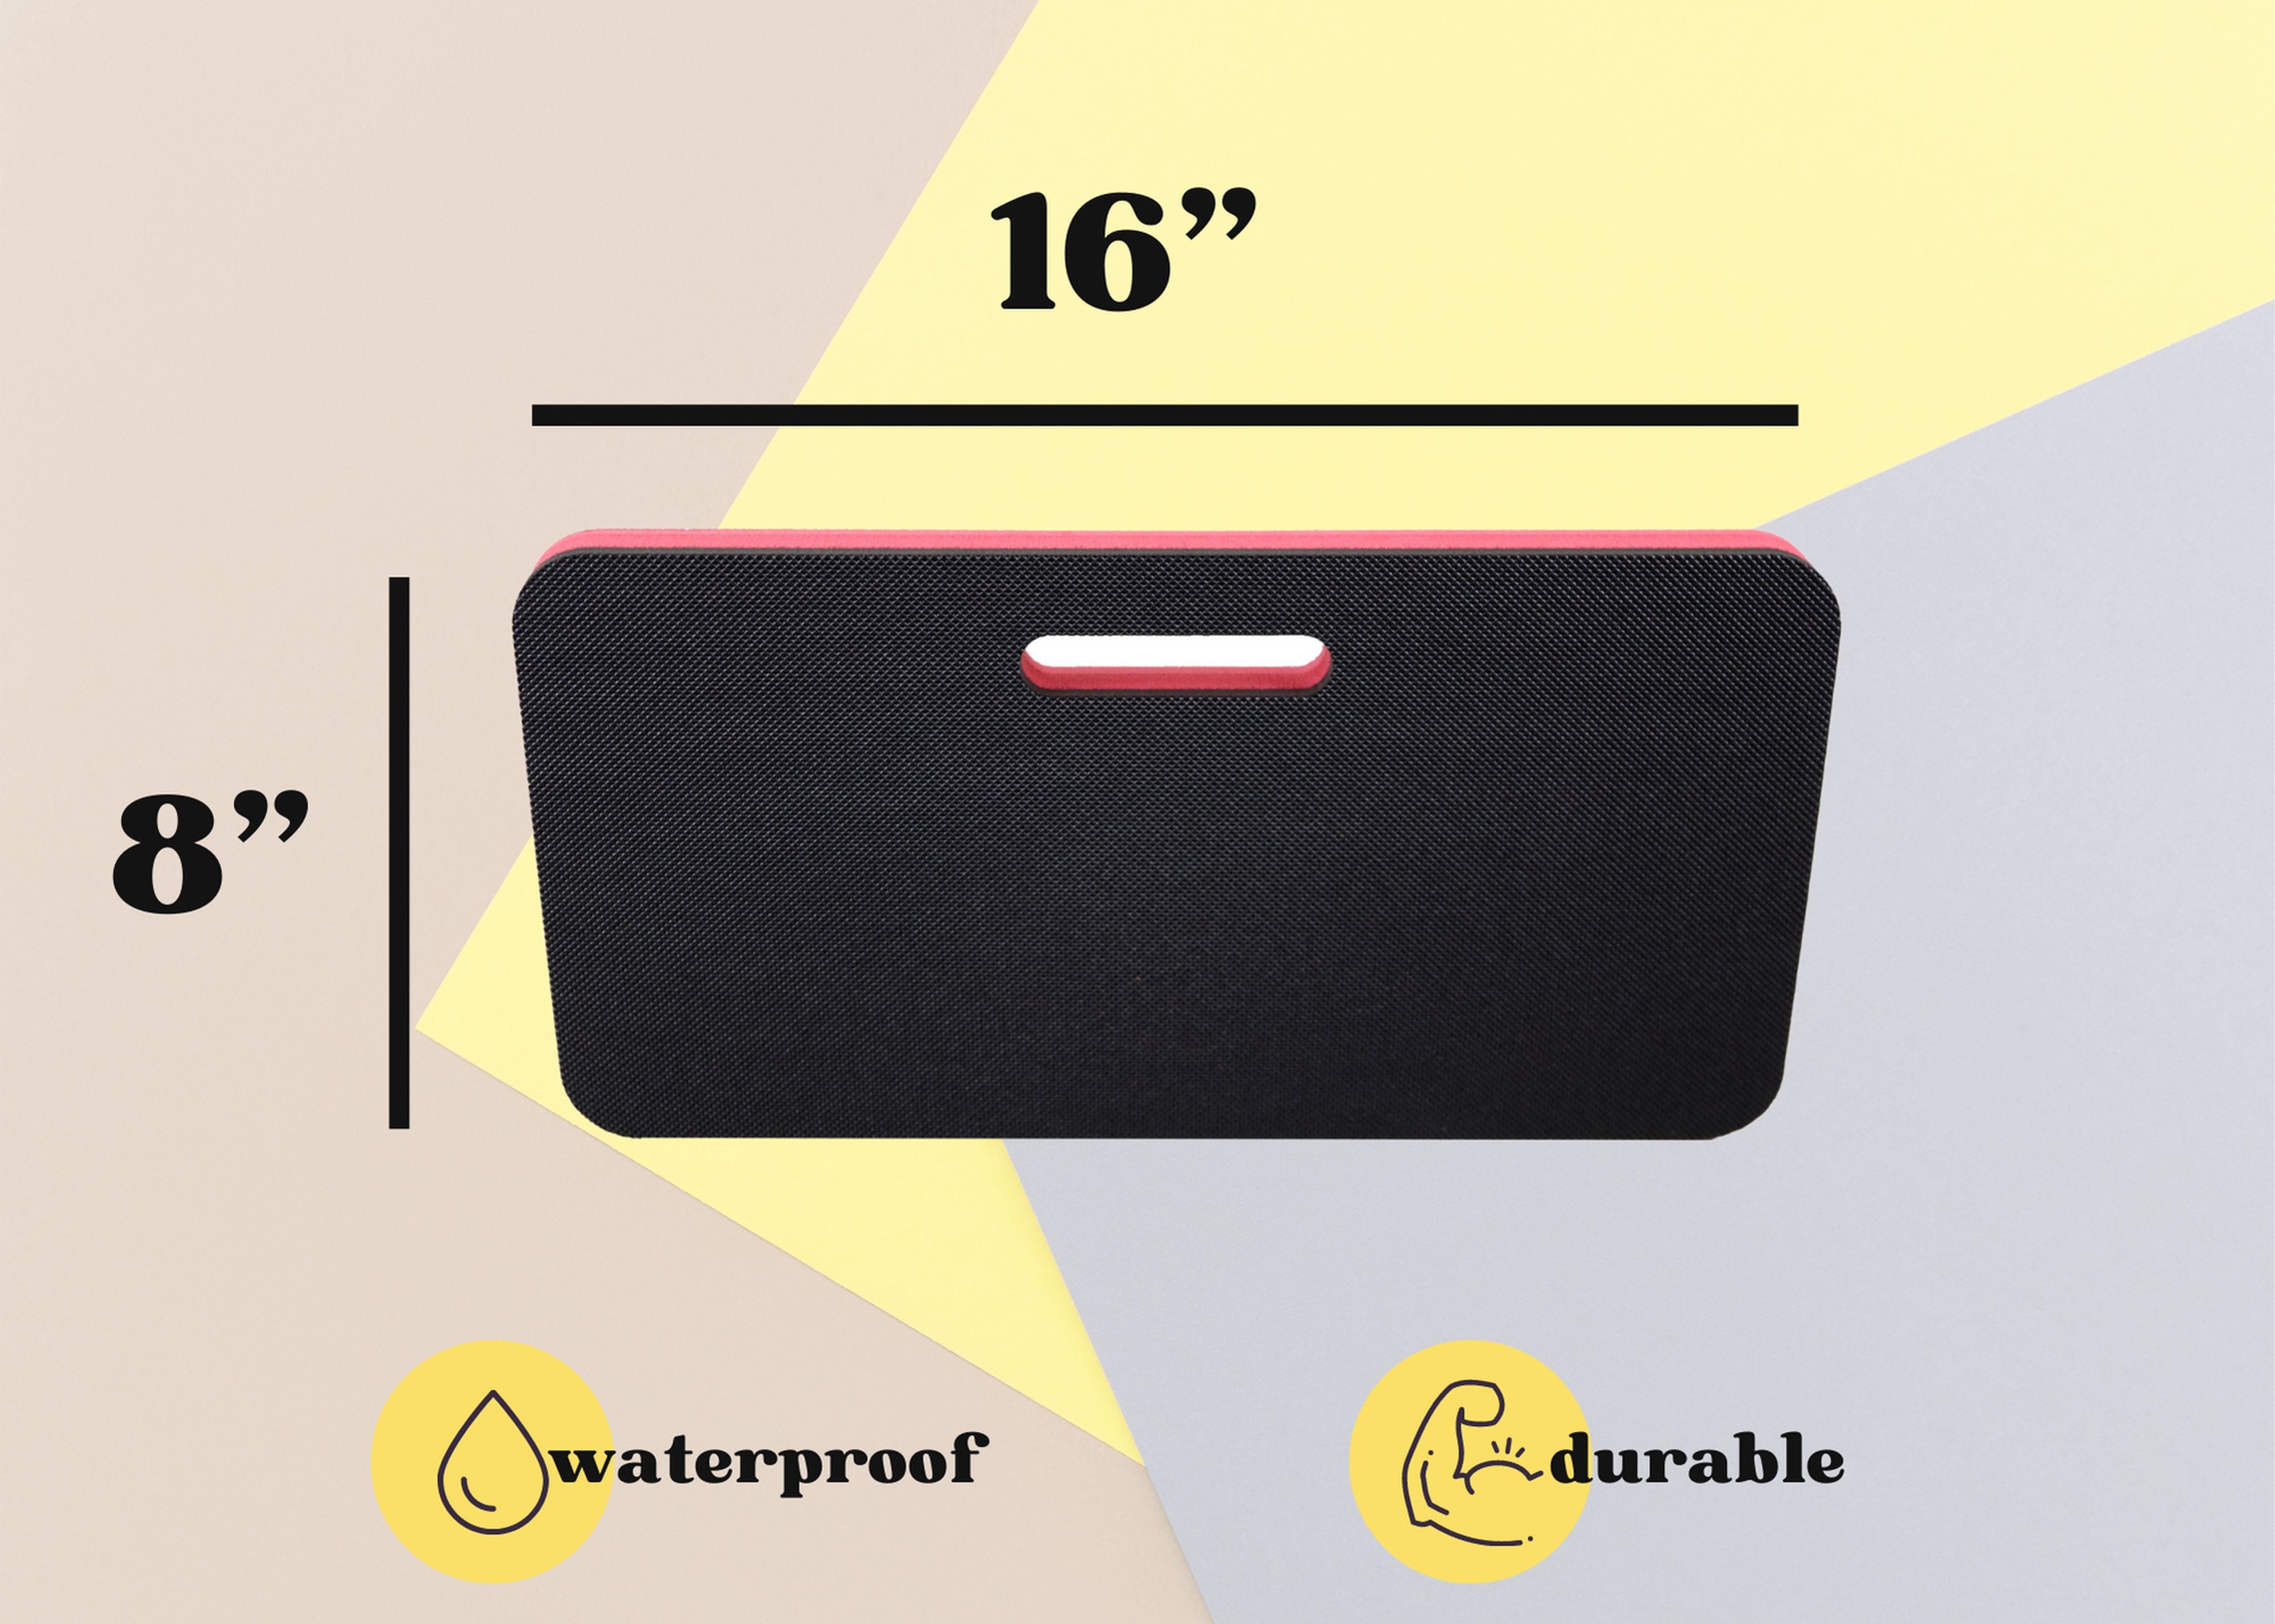 2 Portable Knee Cushions Red and Black for Home Garden Work Automotive Workshop and More Durable Thick Comfortable High Density Waterproof Foam 16 x 8 Inches Kneeling Pad